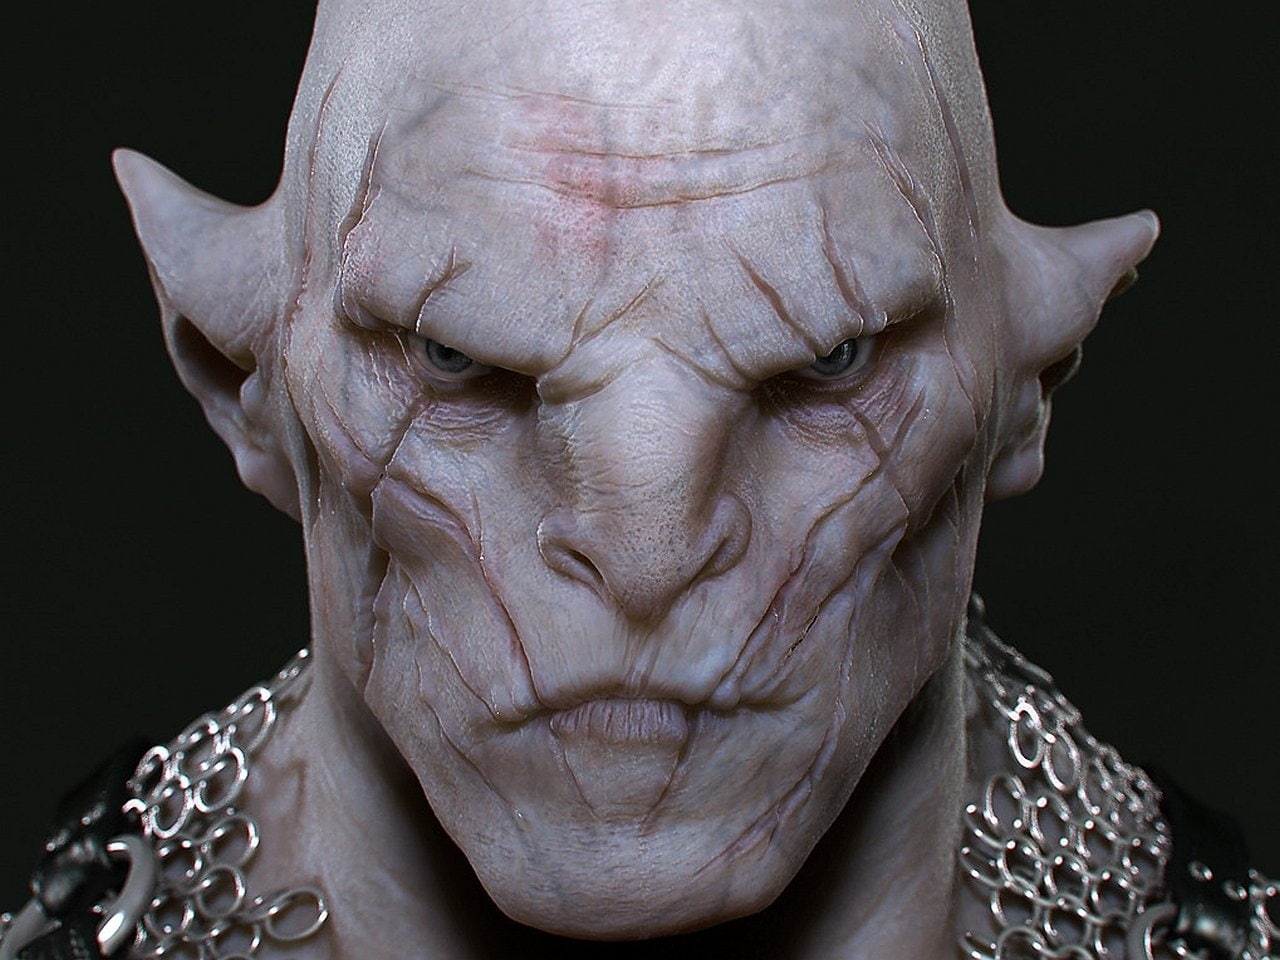 The Lord of the Rings, The Hobbit: An Unexpected Journey, Azog